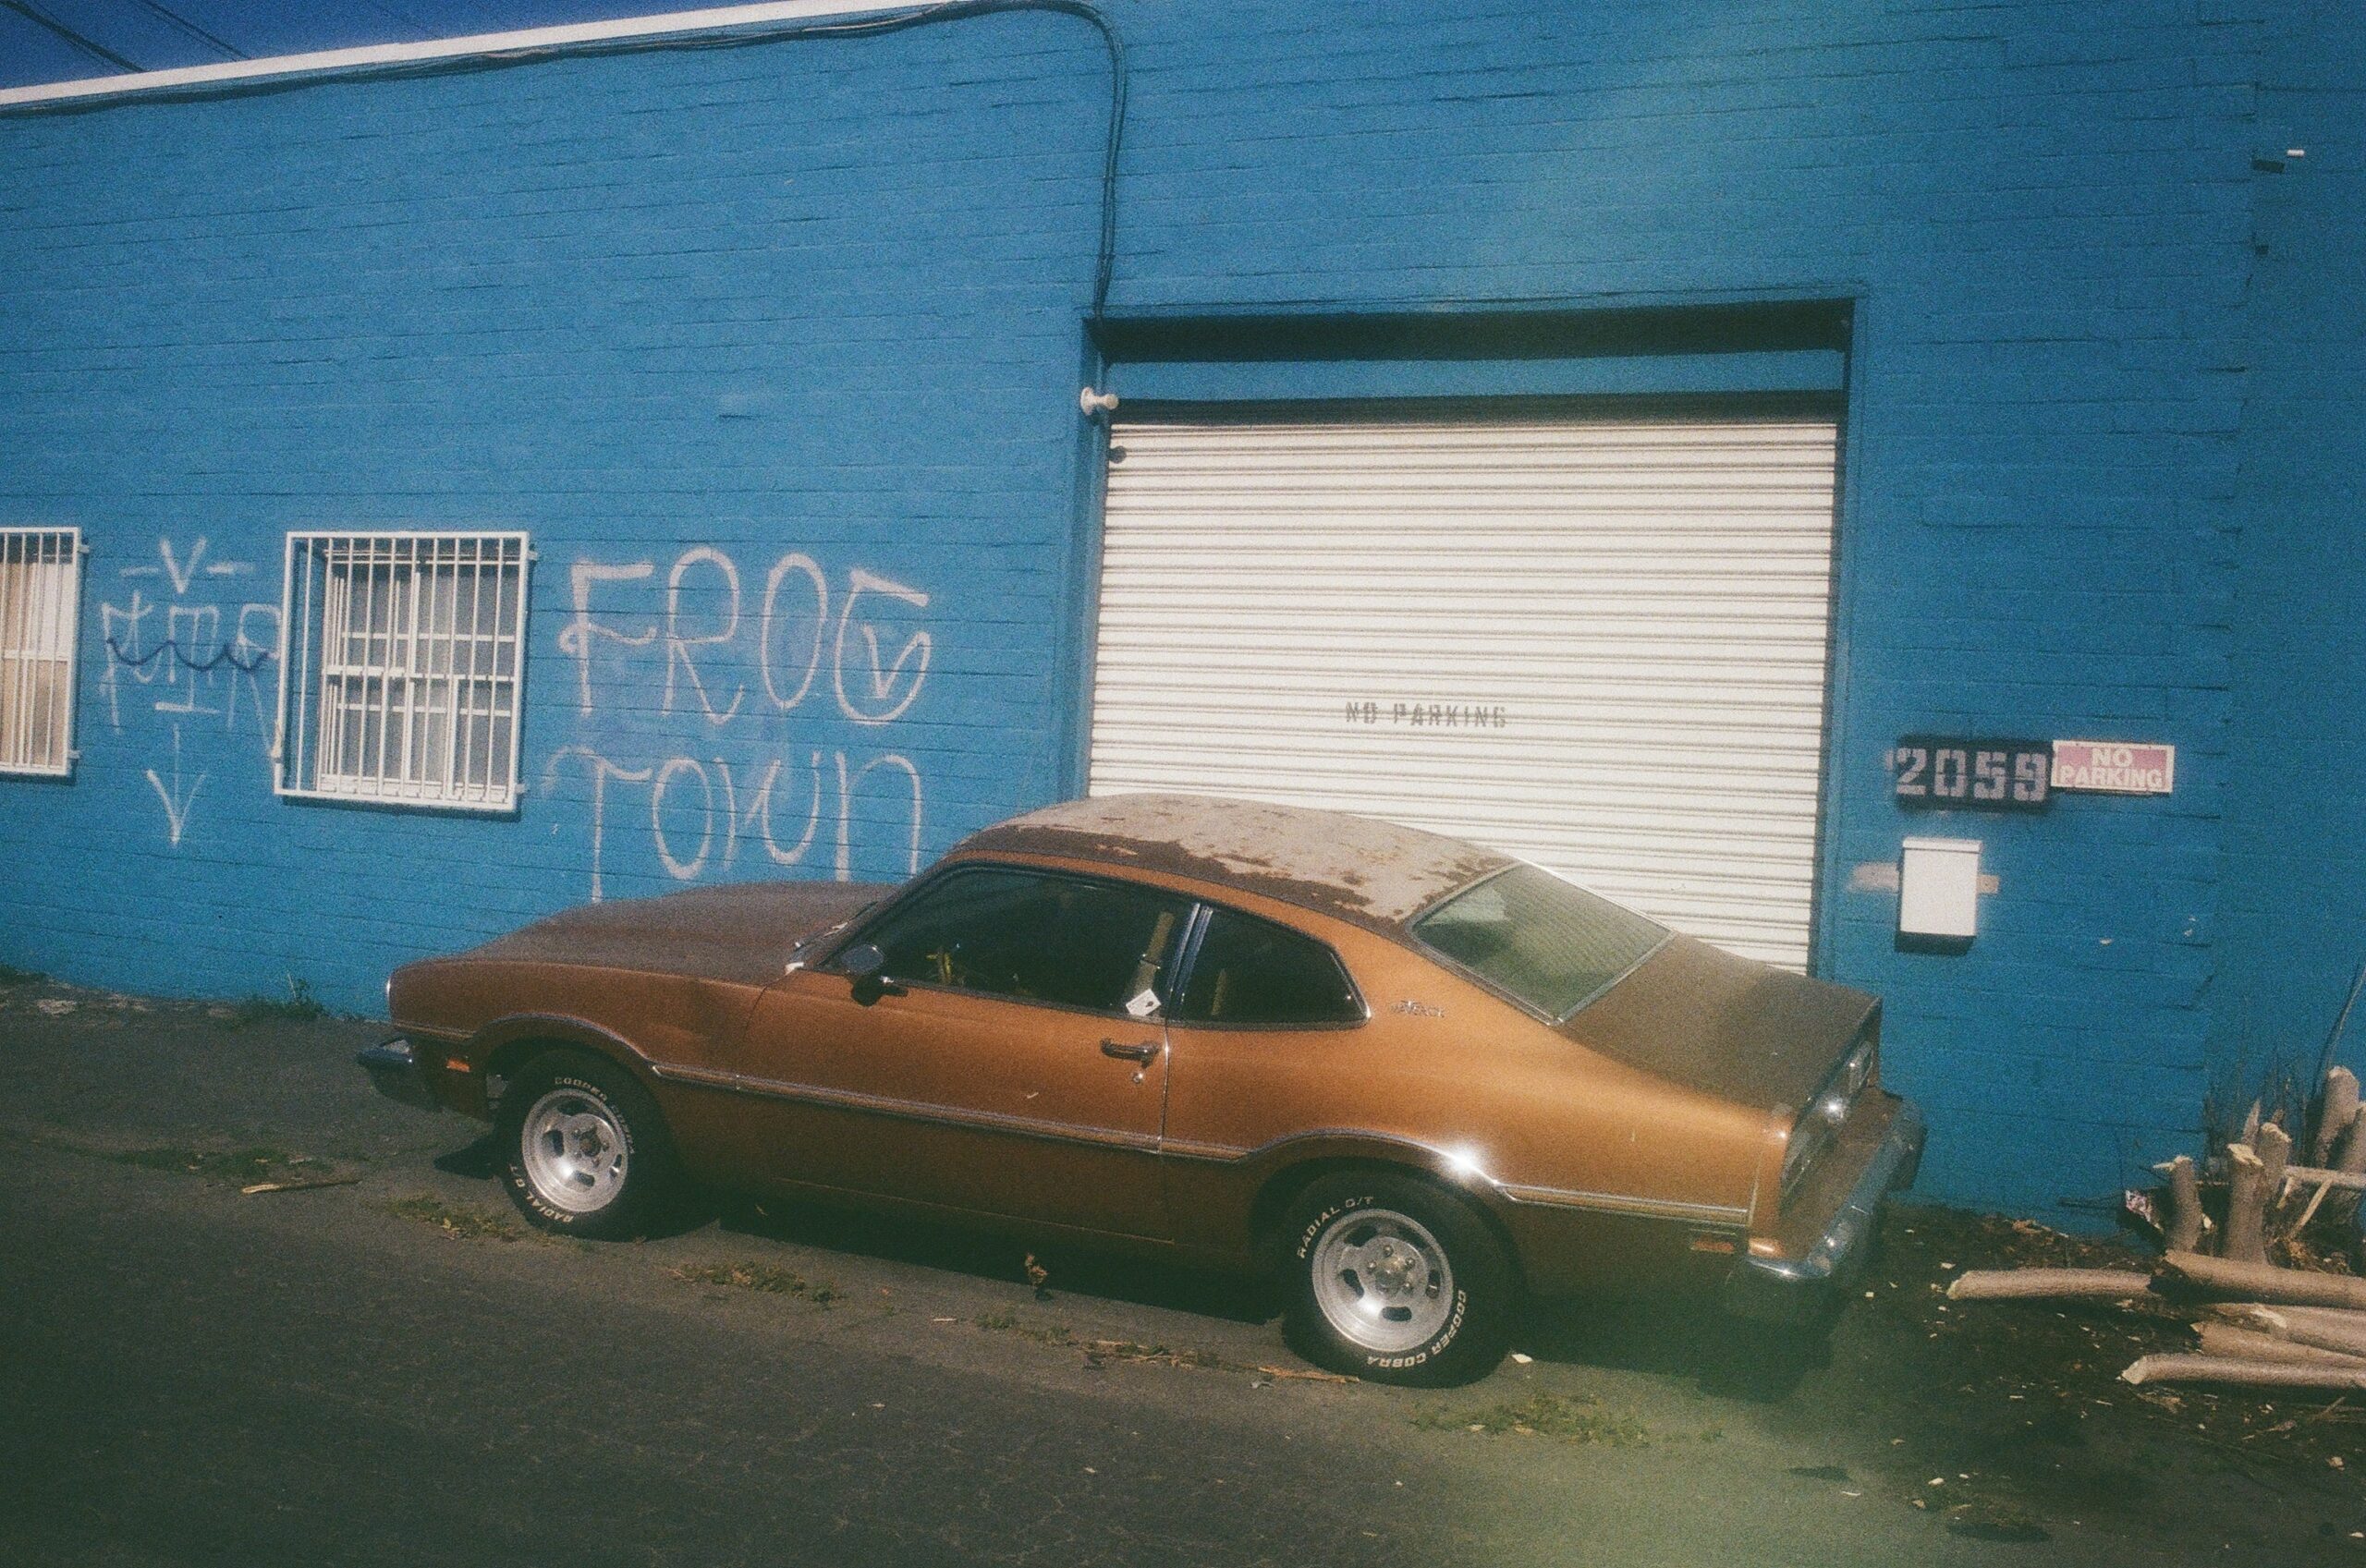 Car from 1980 is parked near the blue wall